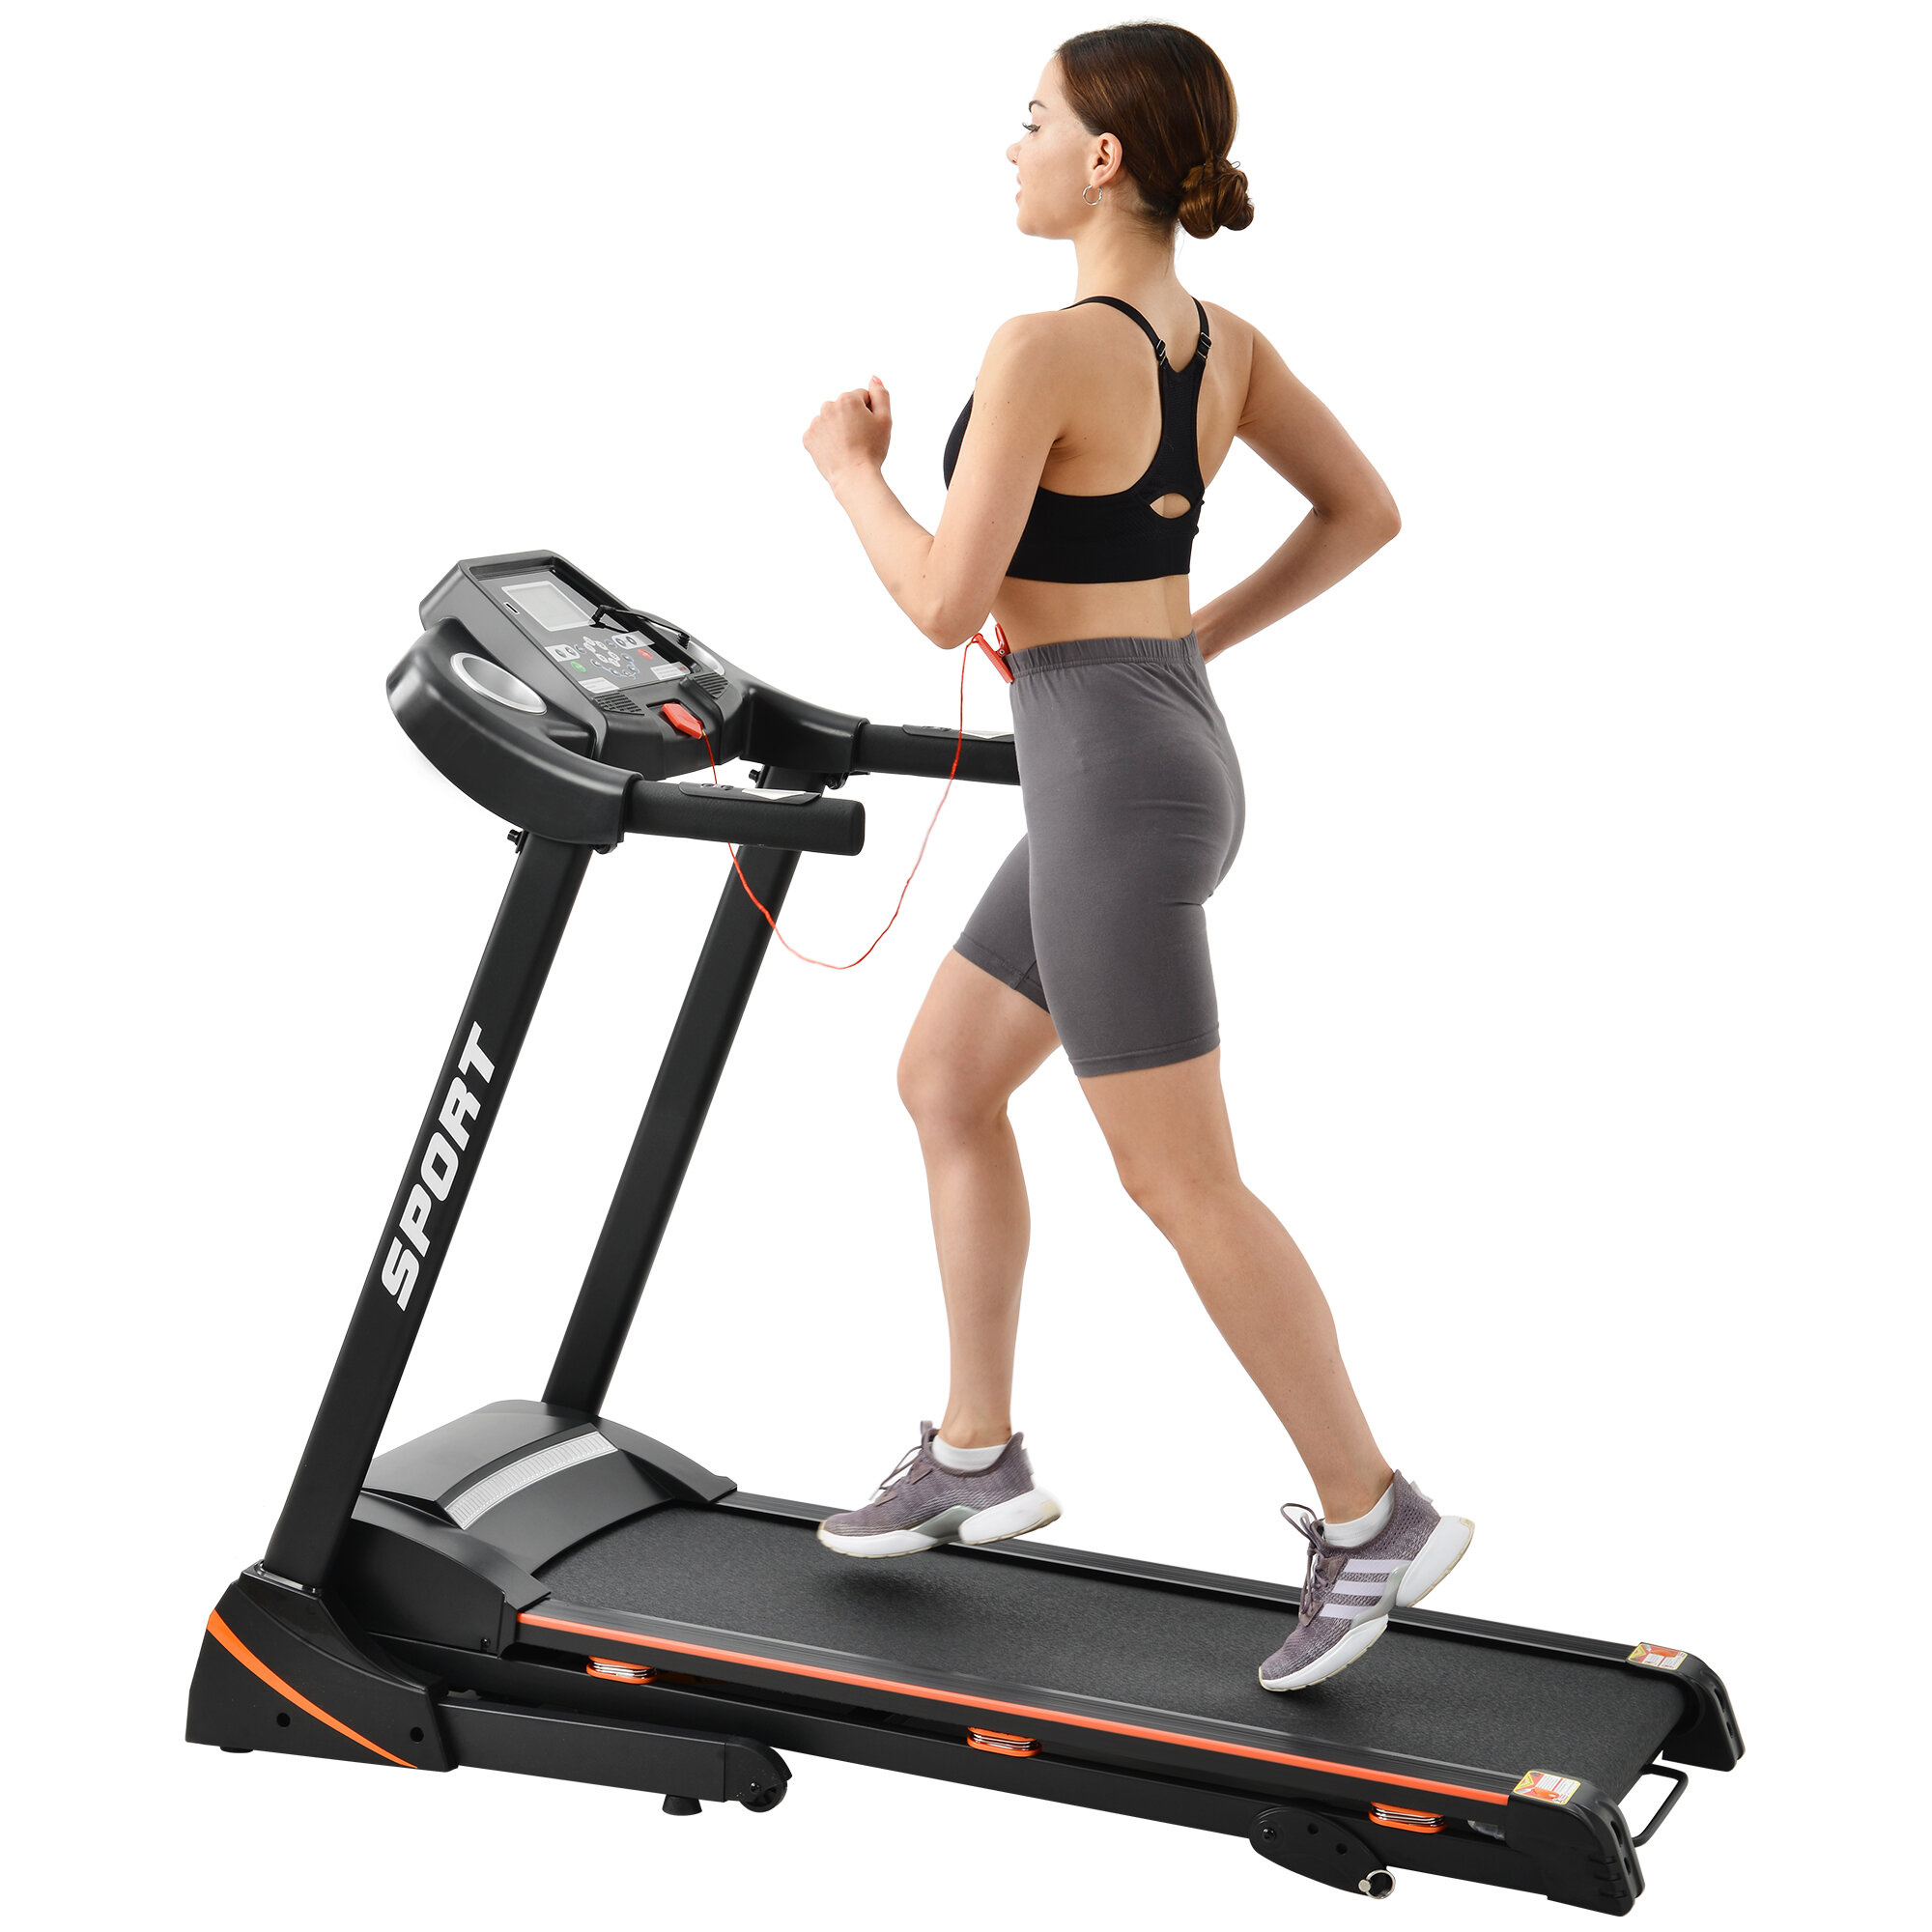 

[USA Direct] 14.8km/h 3.5HP Folding Treadmill 12 Programs Electric Running Machine Fitness Gym Home Max Load 330lbs US P